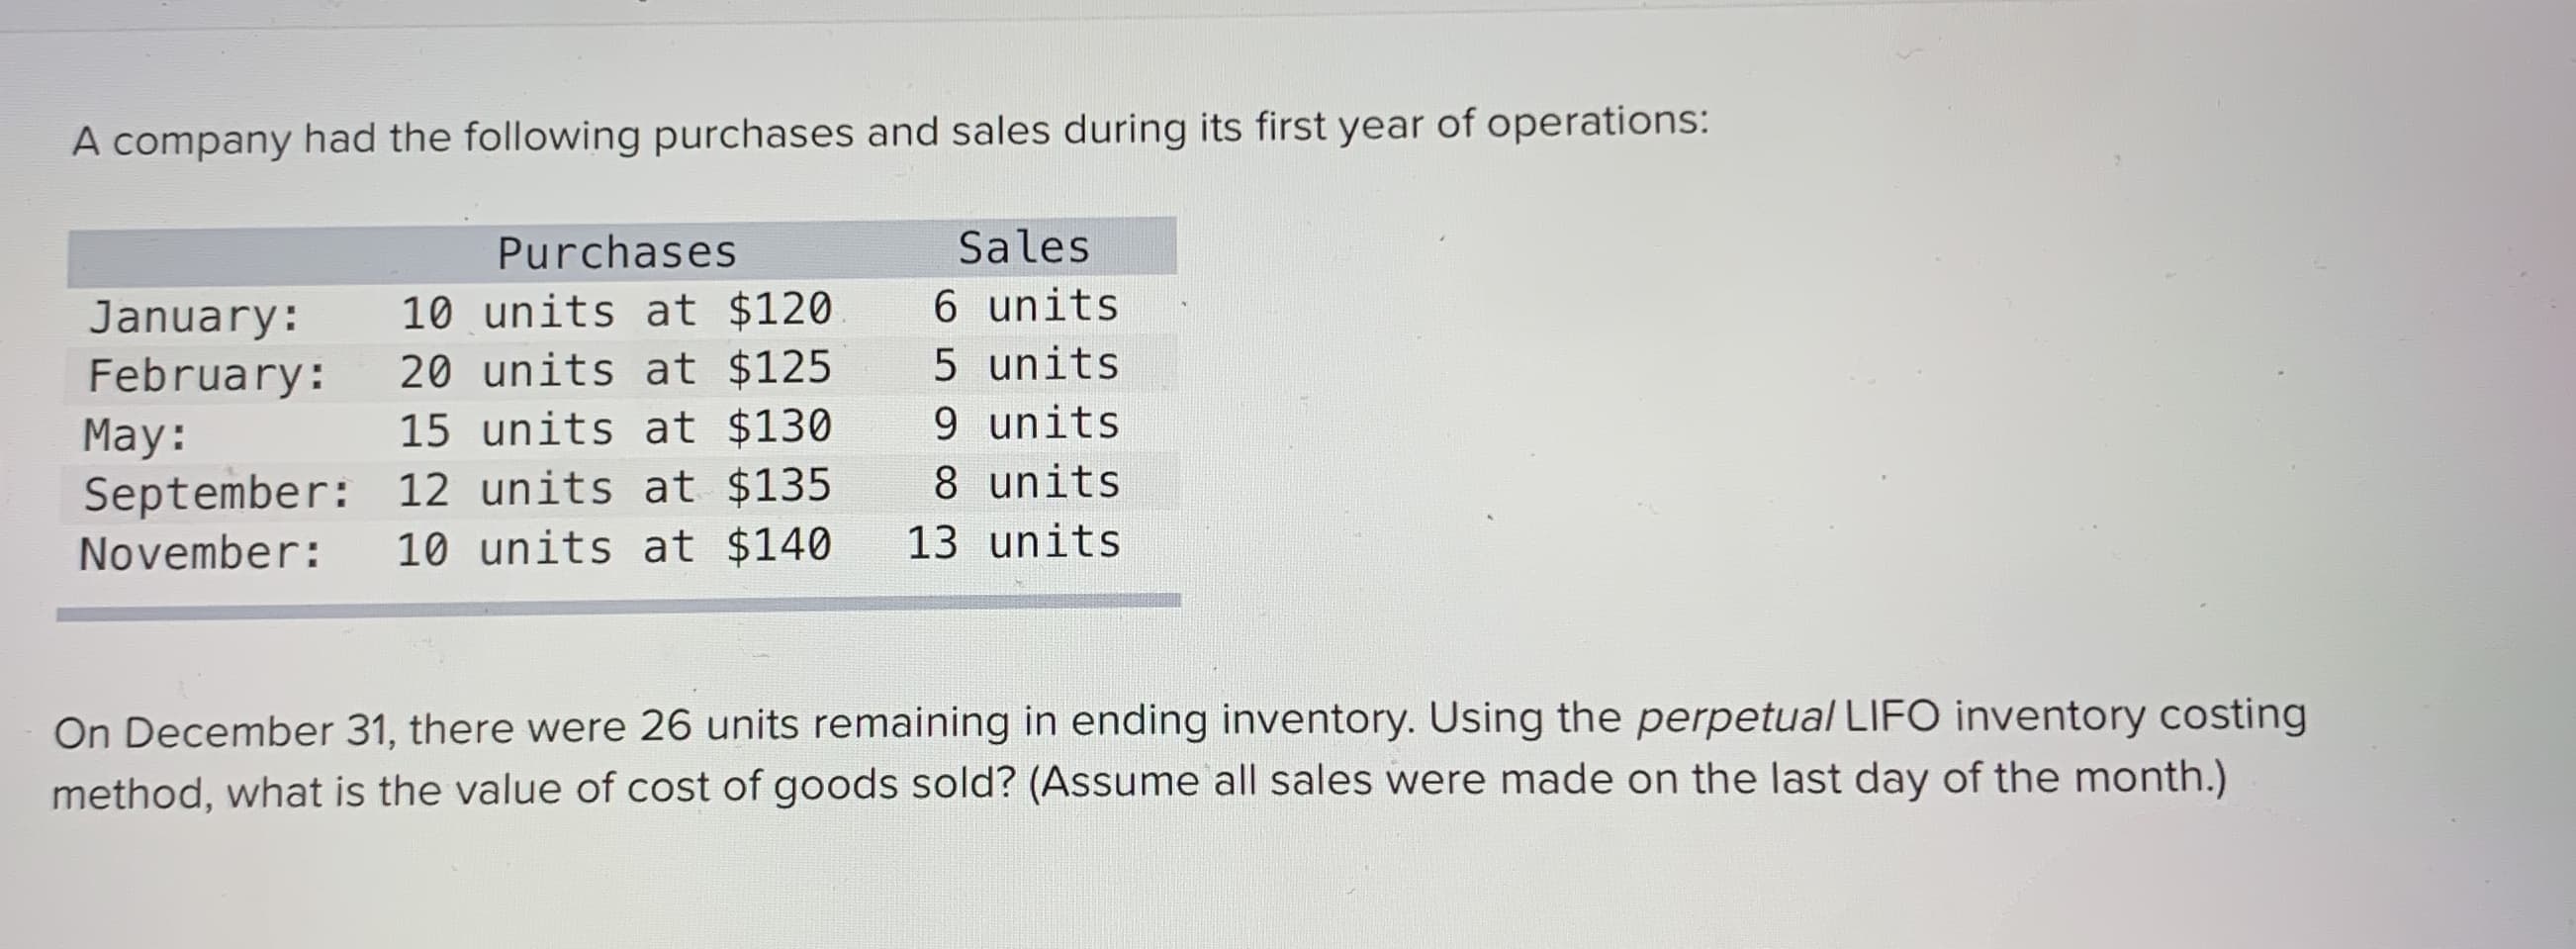 A company had the following purchases and sales during its first year of operations:
Purchases
Sales
6 units
10 units at $120
20 units at $125
January:
February:
May:
September: 12 units at $135
5 units
15 units at $130
9 units
8 units
November:
10 units at $140
13 units
On December 31, there were 26 units remaining in ending inventory. Using the perpetual LIFO inventory costing
method, what is the value of cost of goods sold? (Assume all sales were made on the last day of the month.)
